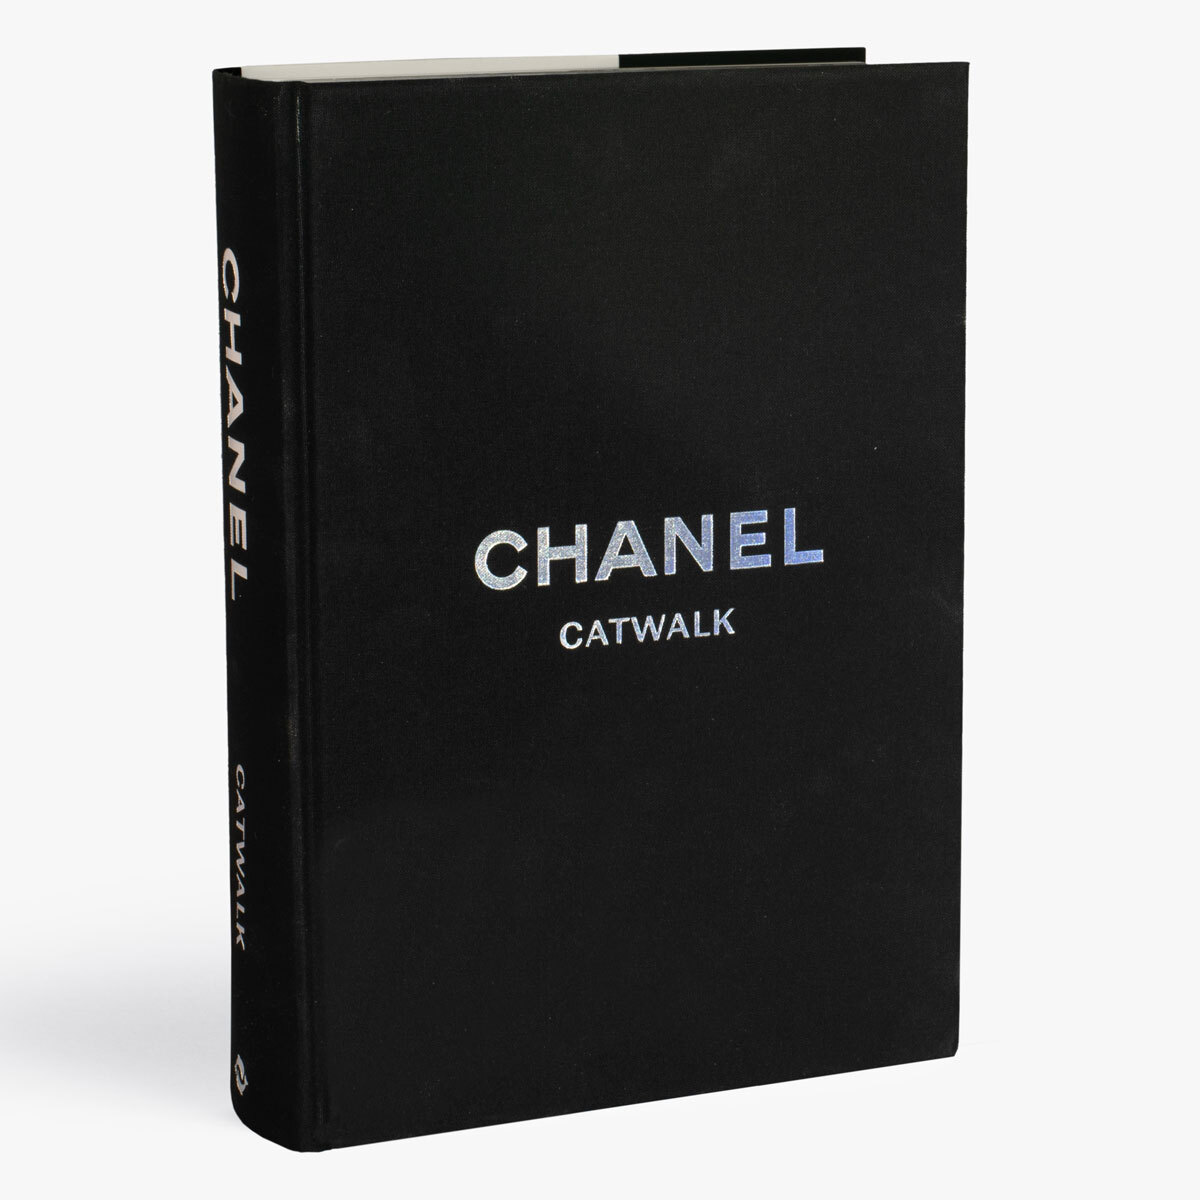 Catwalk: The Complete Fashion Collections - Chanel | Cos...